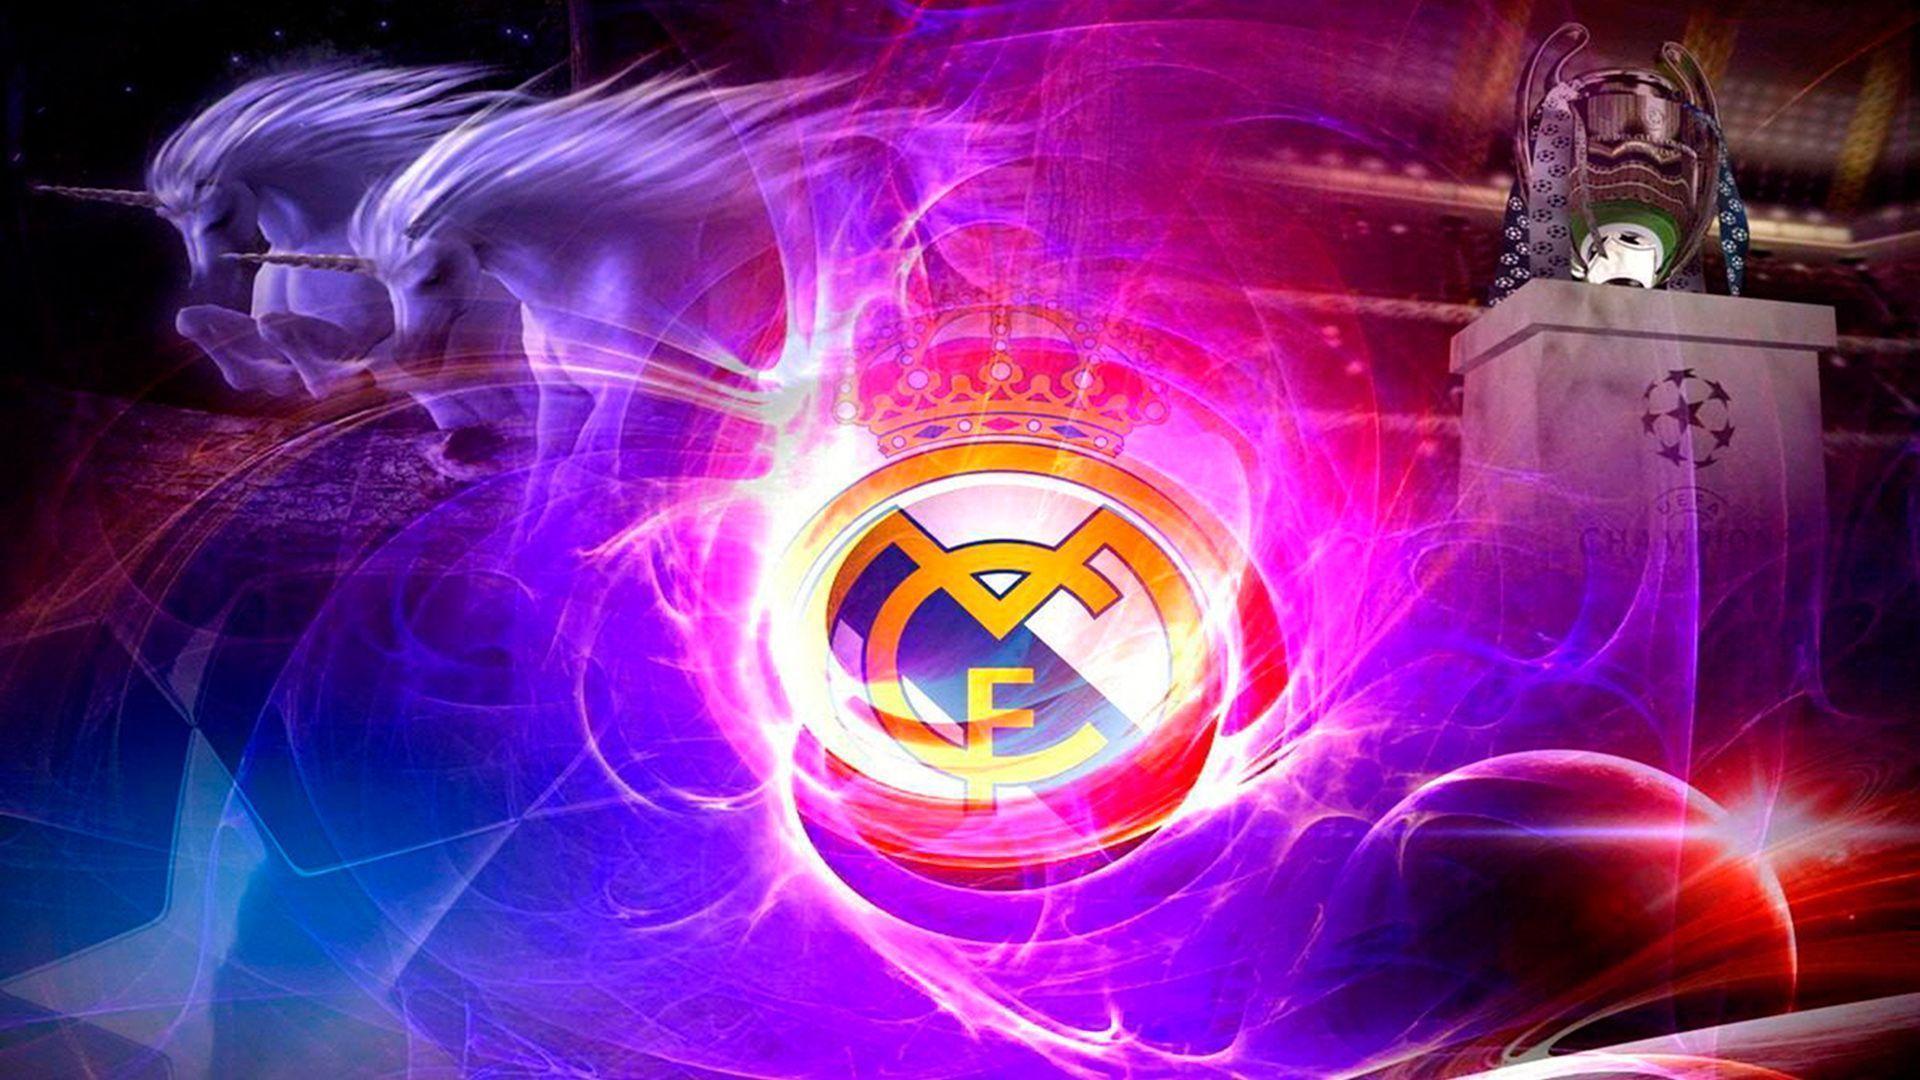 Real Madrid 2017 Wallpapers 3d Wallpaper Cave